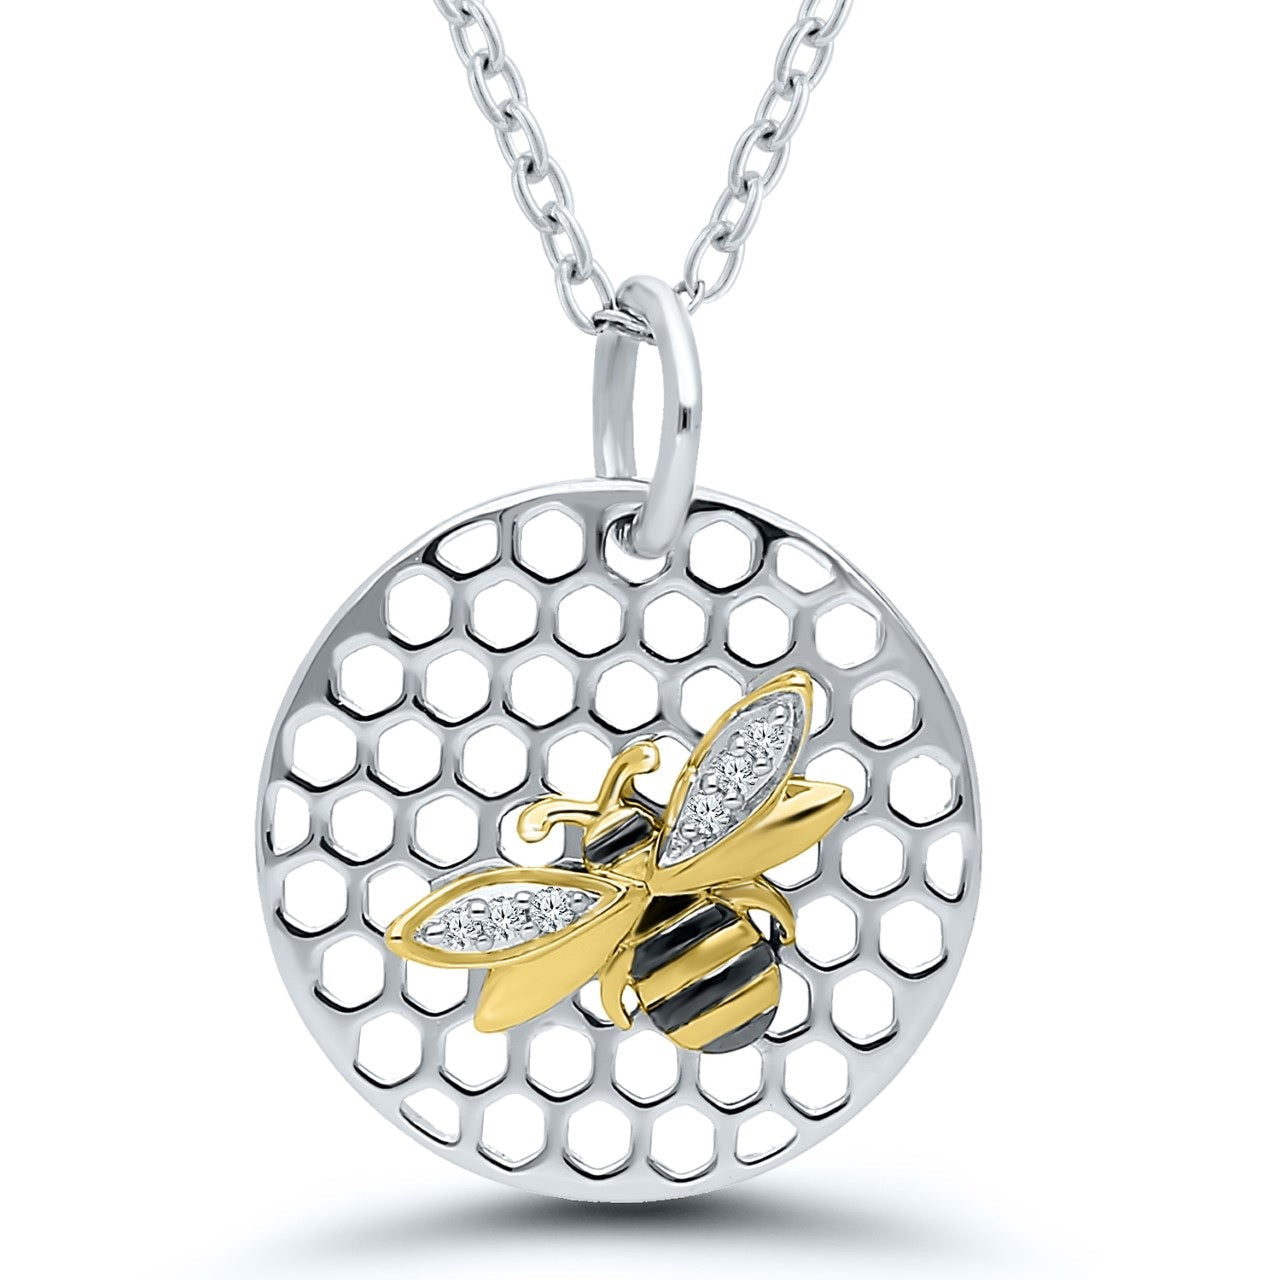 Bumble Bee Pendant | Autumn and May | Beautiful Nature Jewellery